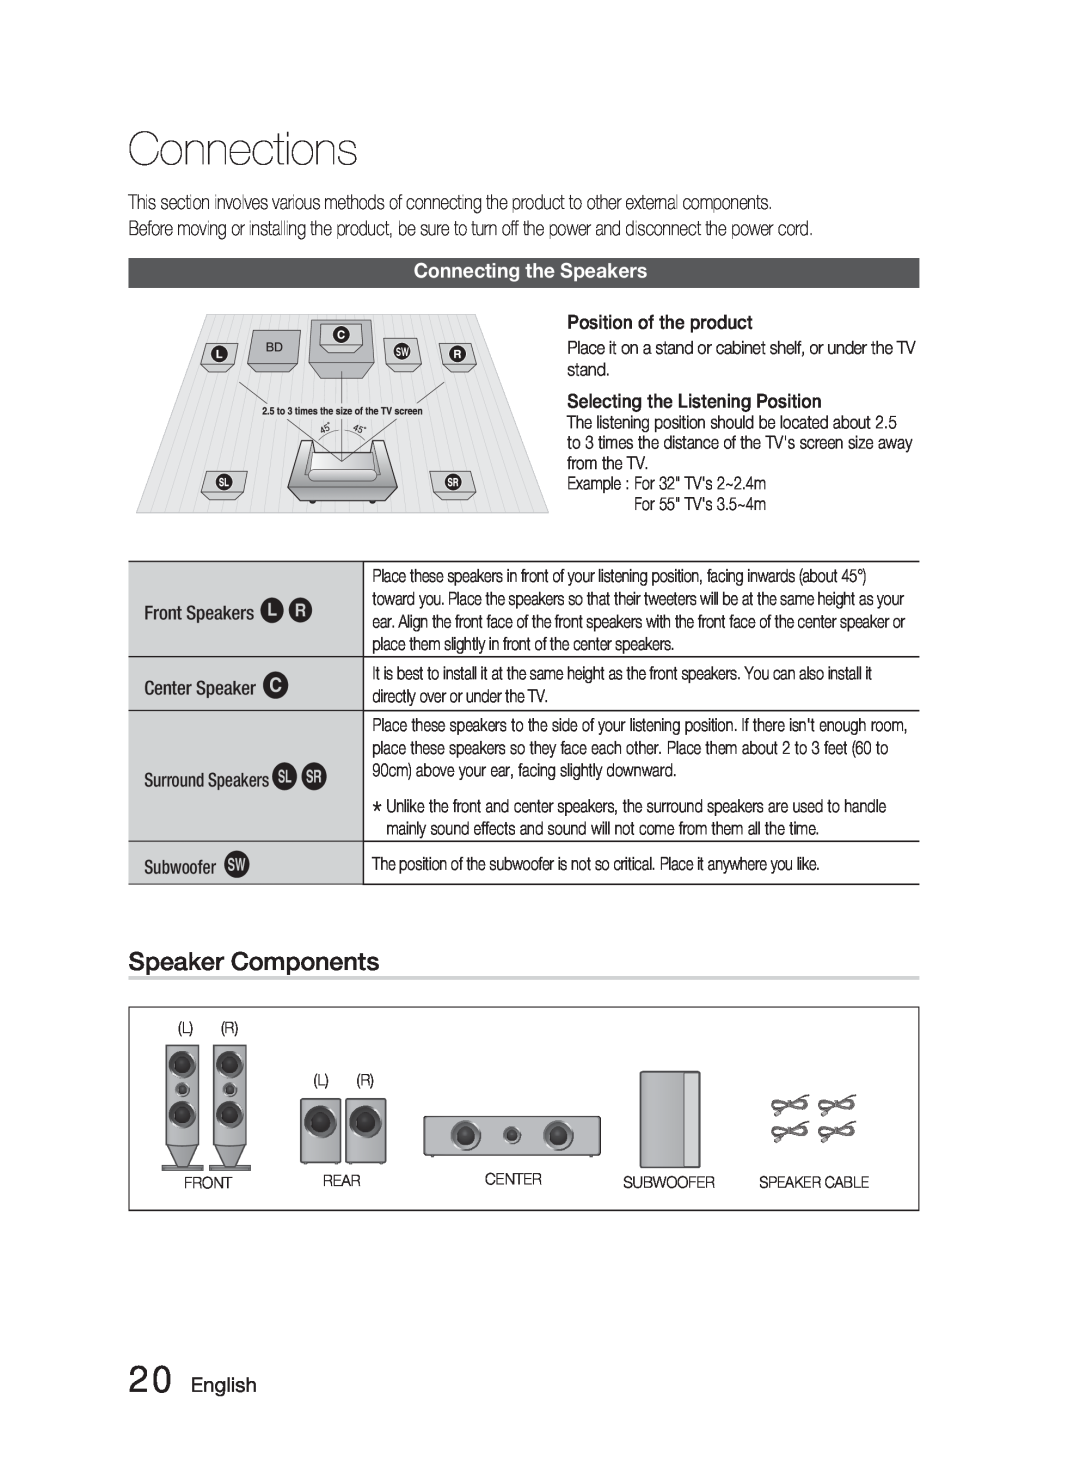 Samsung HT-C6900W user manual Connections, Speaker Components, Connecting the Speakers, English 